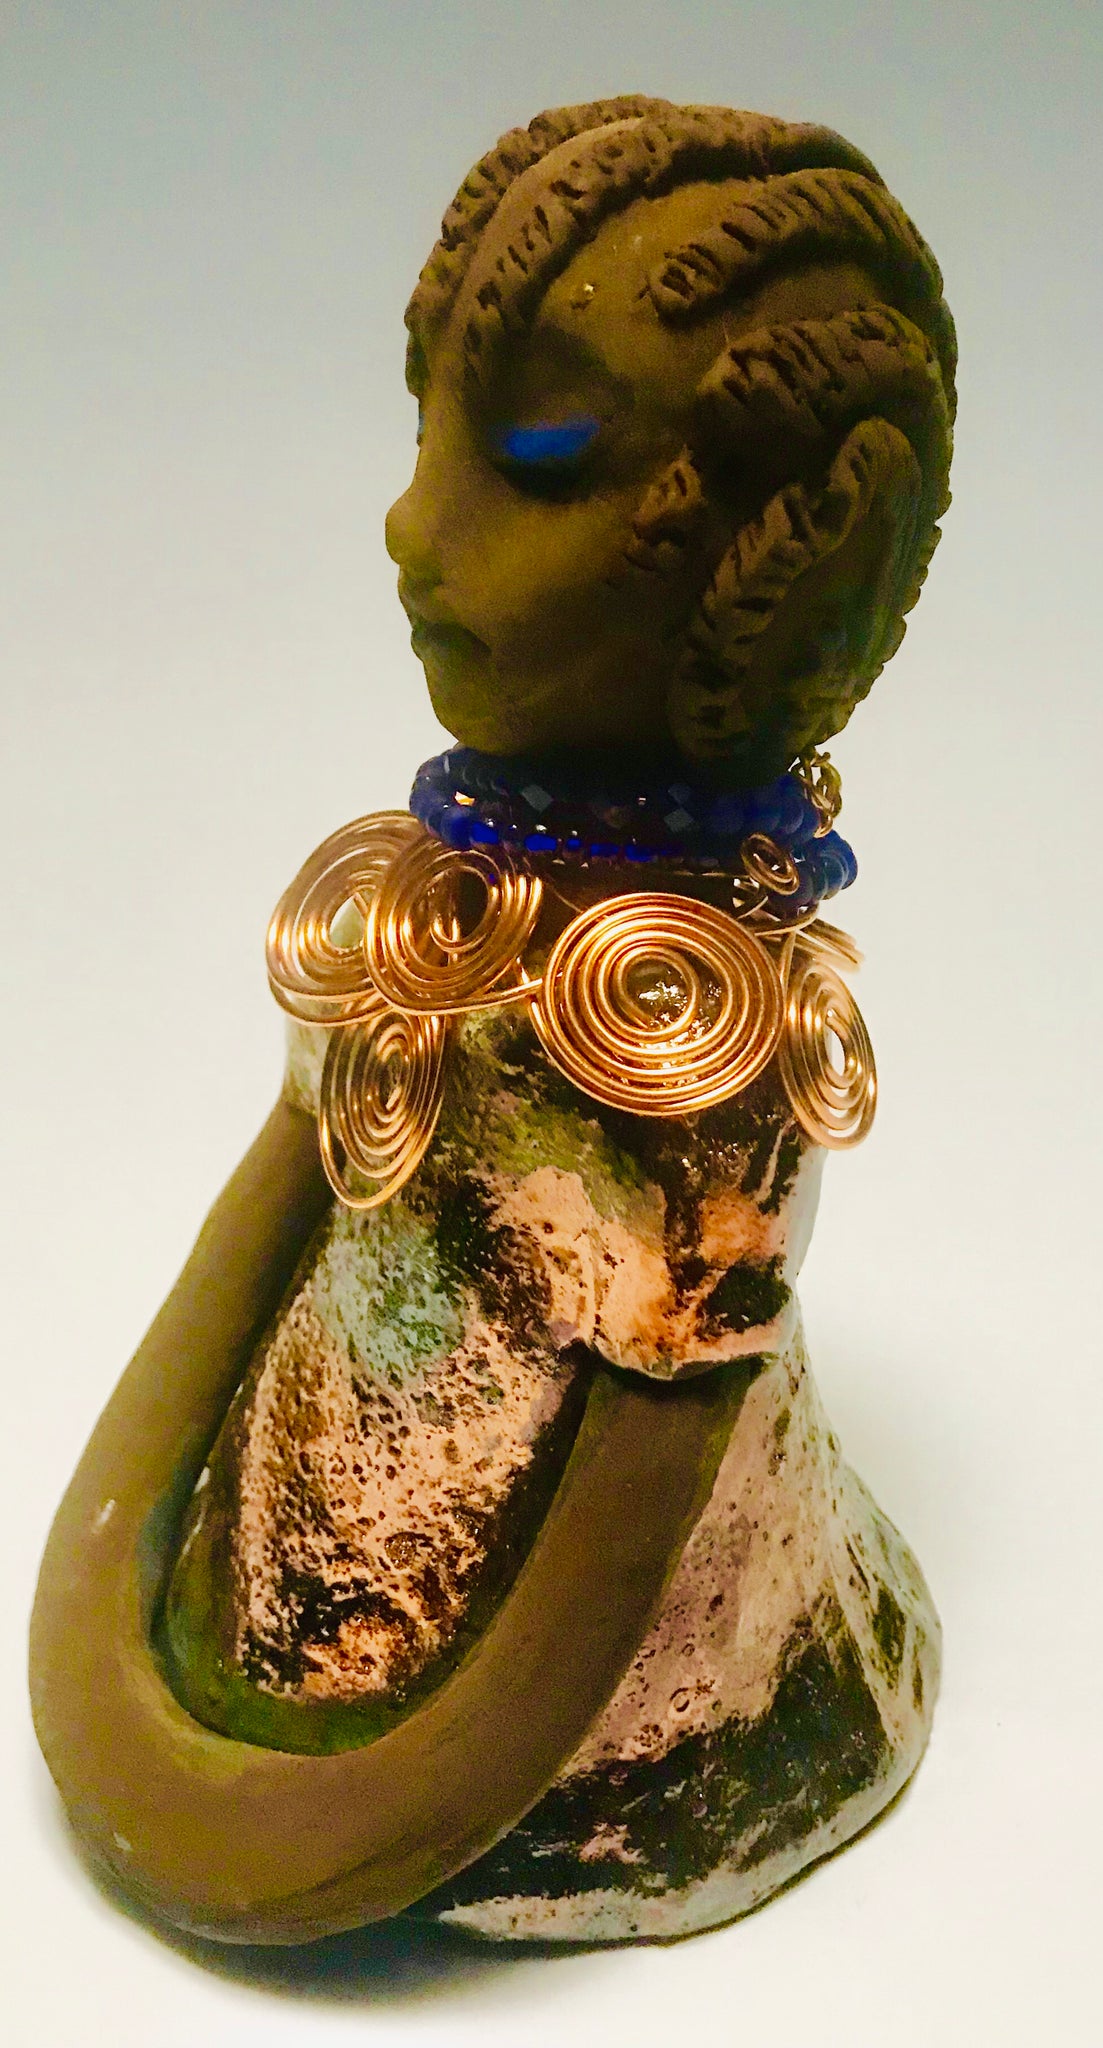 Anja stands 7" x 4" x 4" and weighs 1.01 lbs. She has a lovely honey brown complexion with  reddish brown lips. She has a braided hairstyle.  Anja has a colorful metallic green antique copper glazed dress. She wears a spiral copper wire necklace on top of a blue beaded collar. With eyes slightly opened, Anja has hopes of finding a new home.